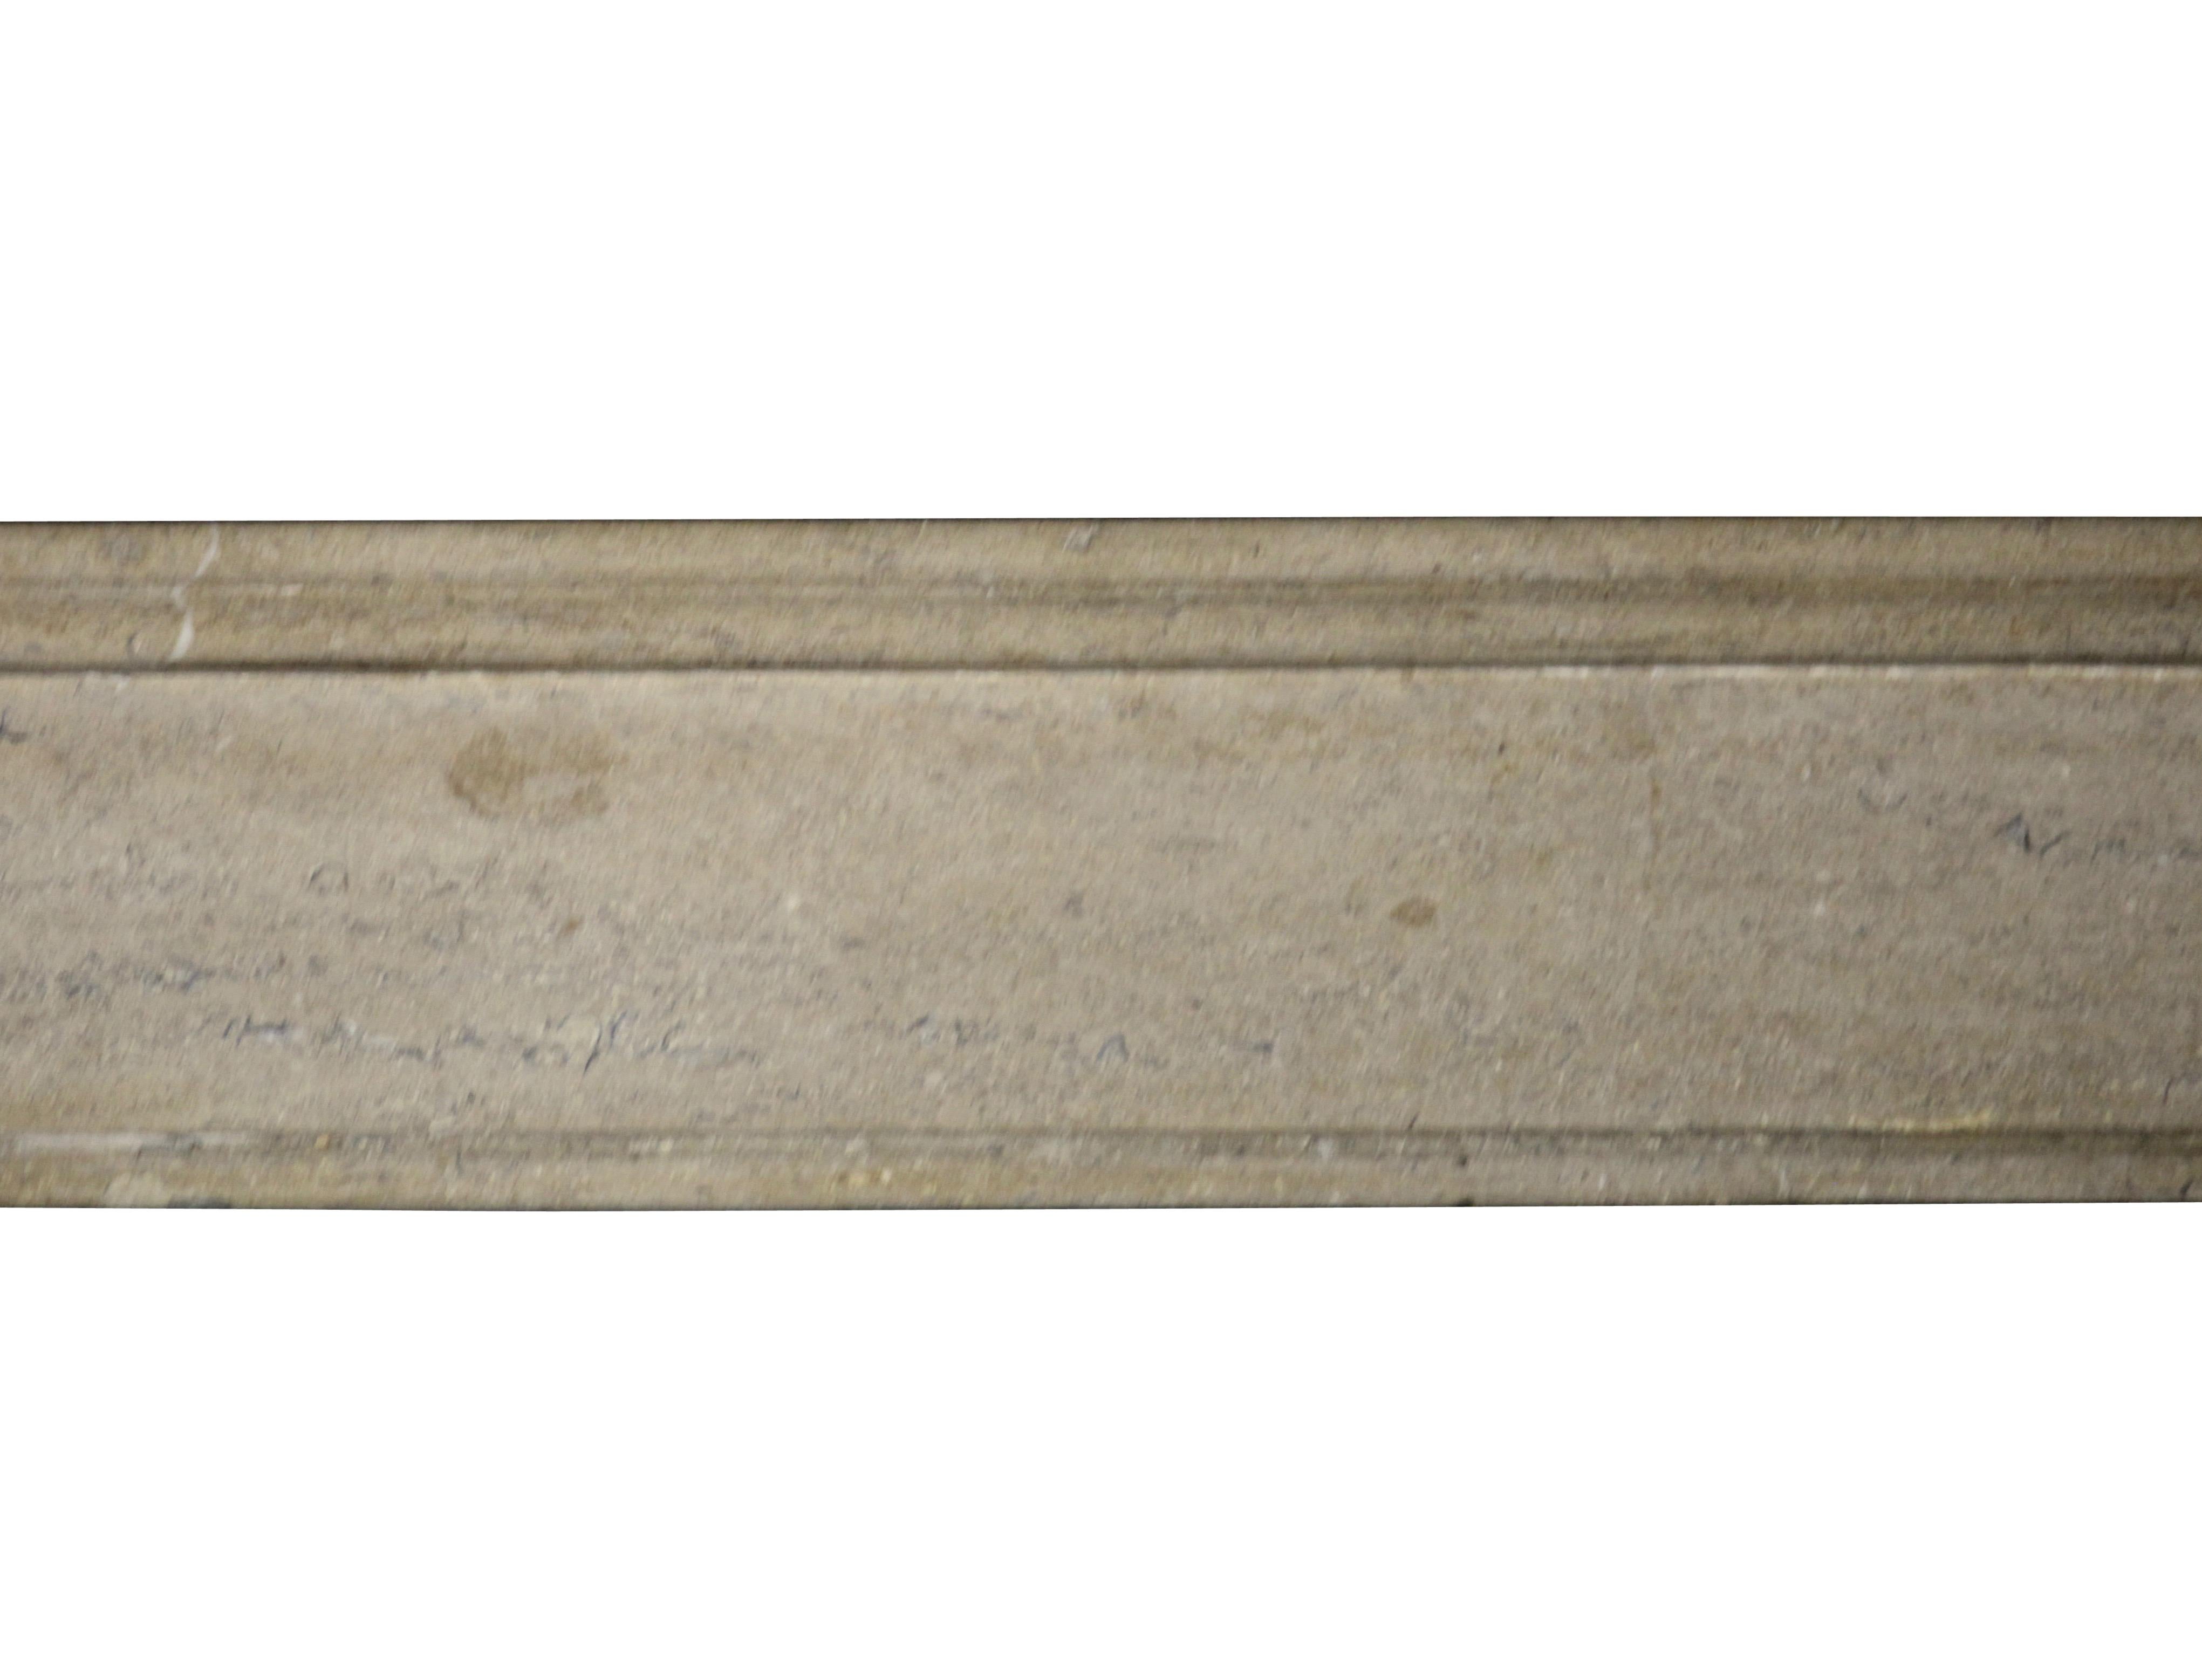 This 19th century French original Bourguignon fireplace mantle in hard stone/limestone is elegant and small. It can perfectly a match a French style country our even a minimalistic timeless interior design.
Measures:
120.5 cm Exterior Width